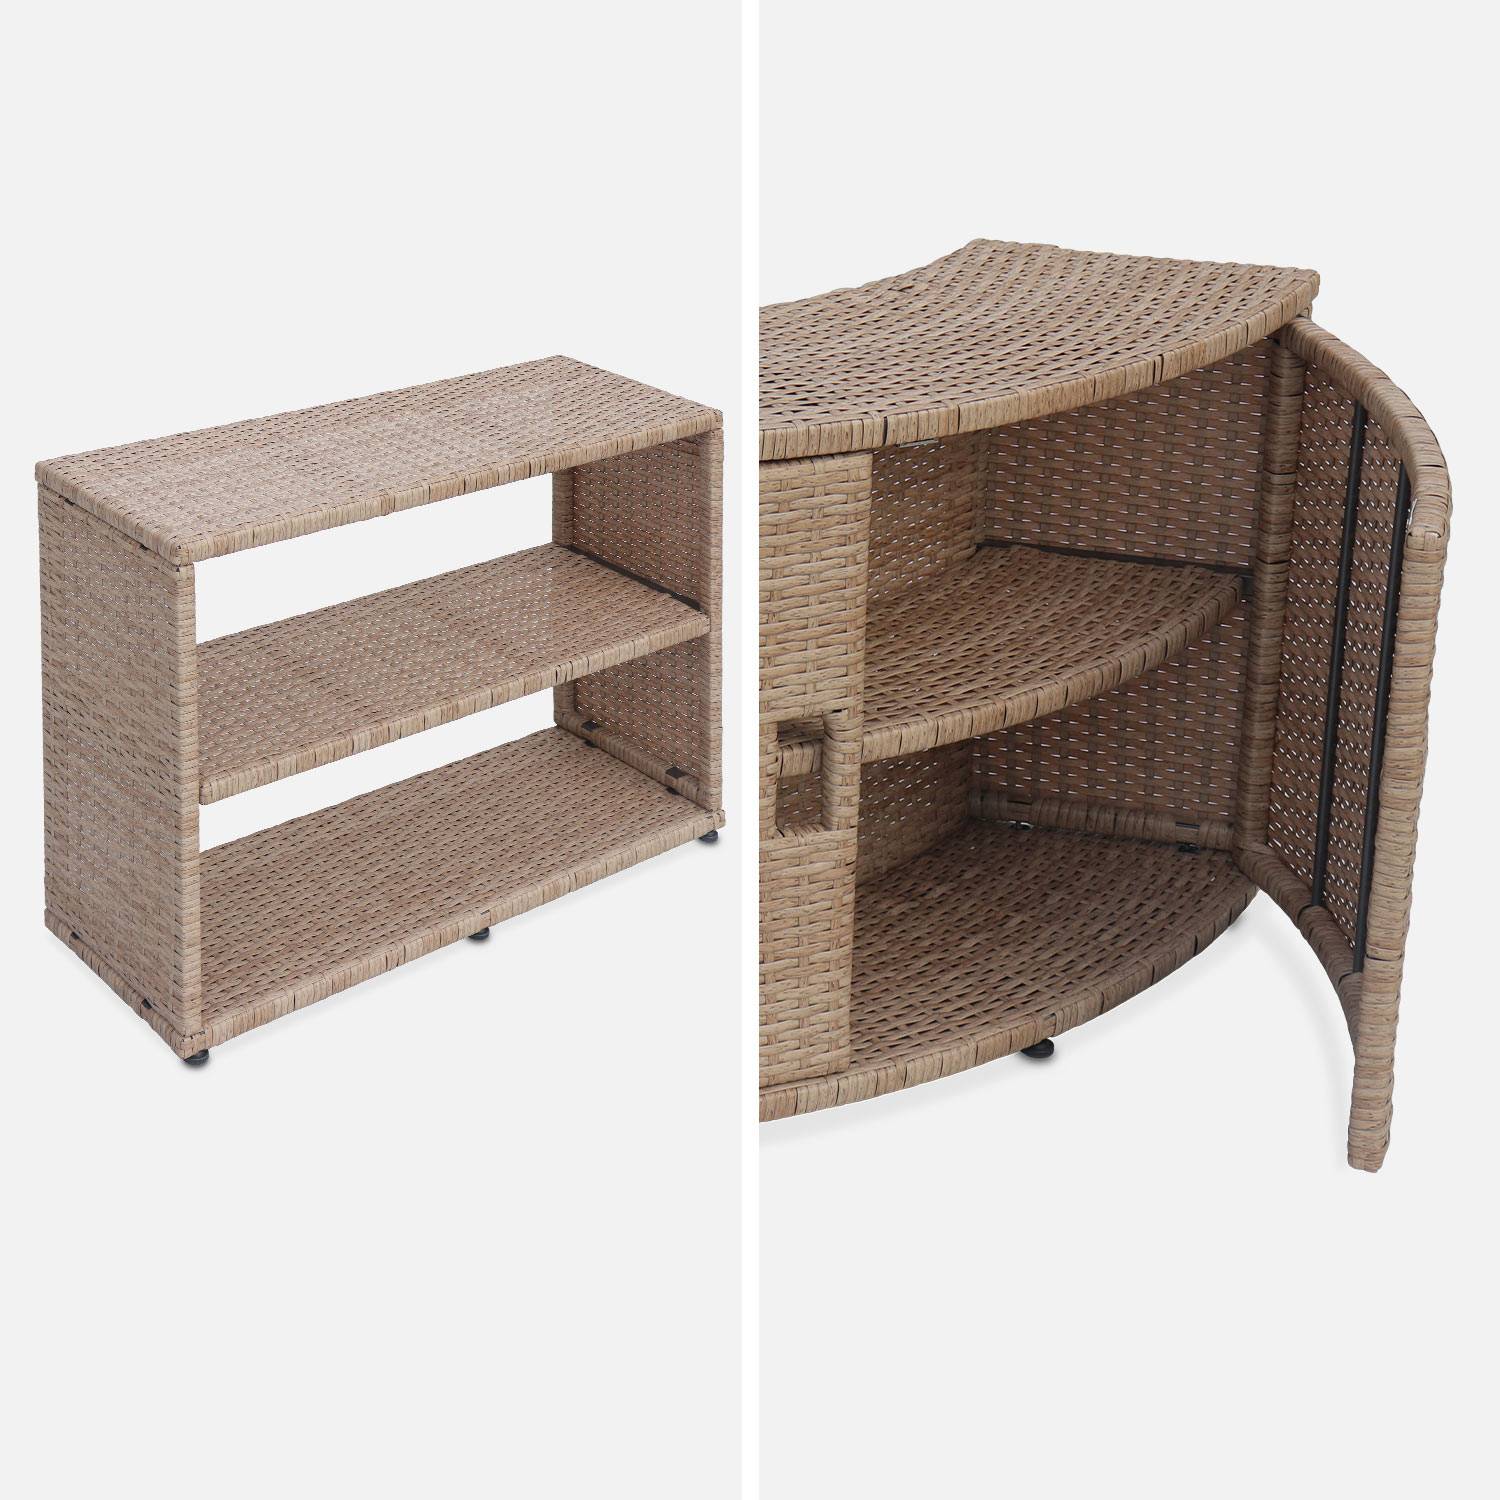 Natural polyrattan surround for square hot tub with cabinet, shelf and footstep,sweeek,Photo5